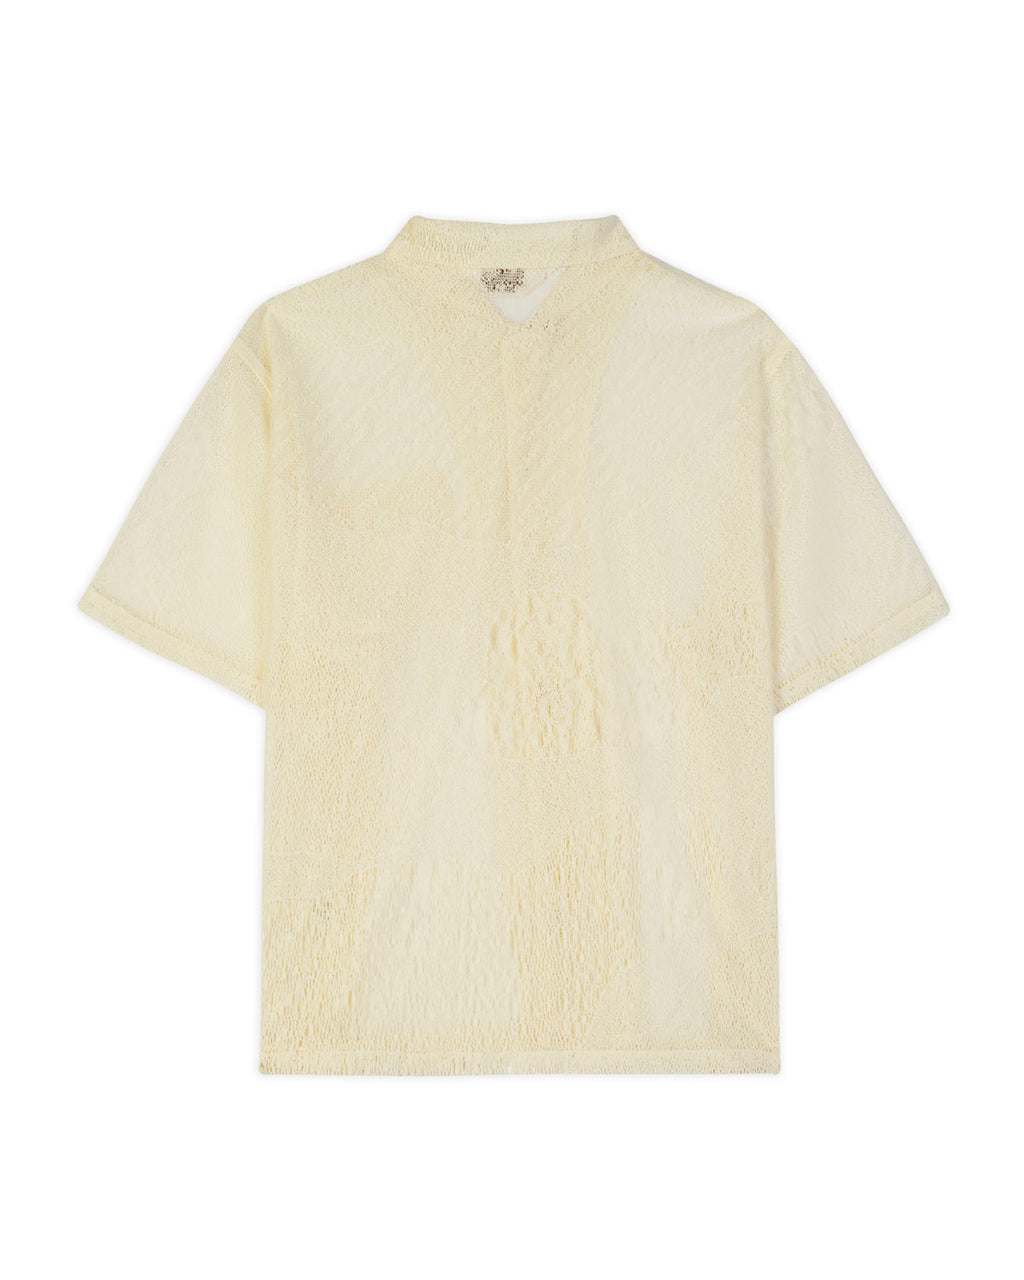 Engineered Mesh S/S Button Up, Natural